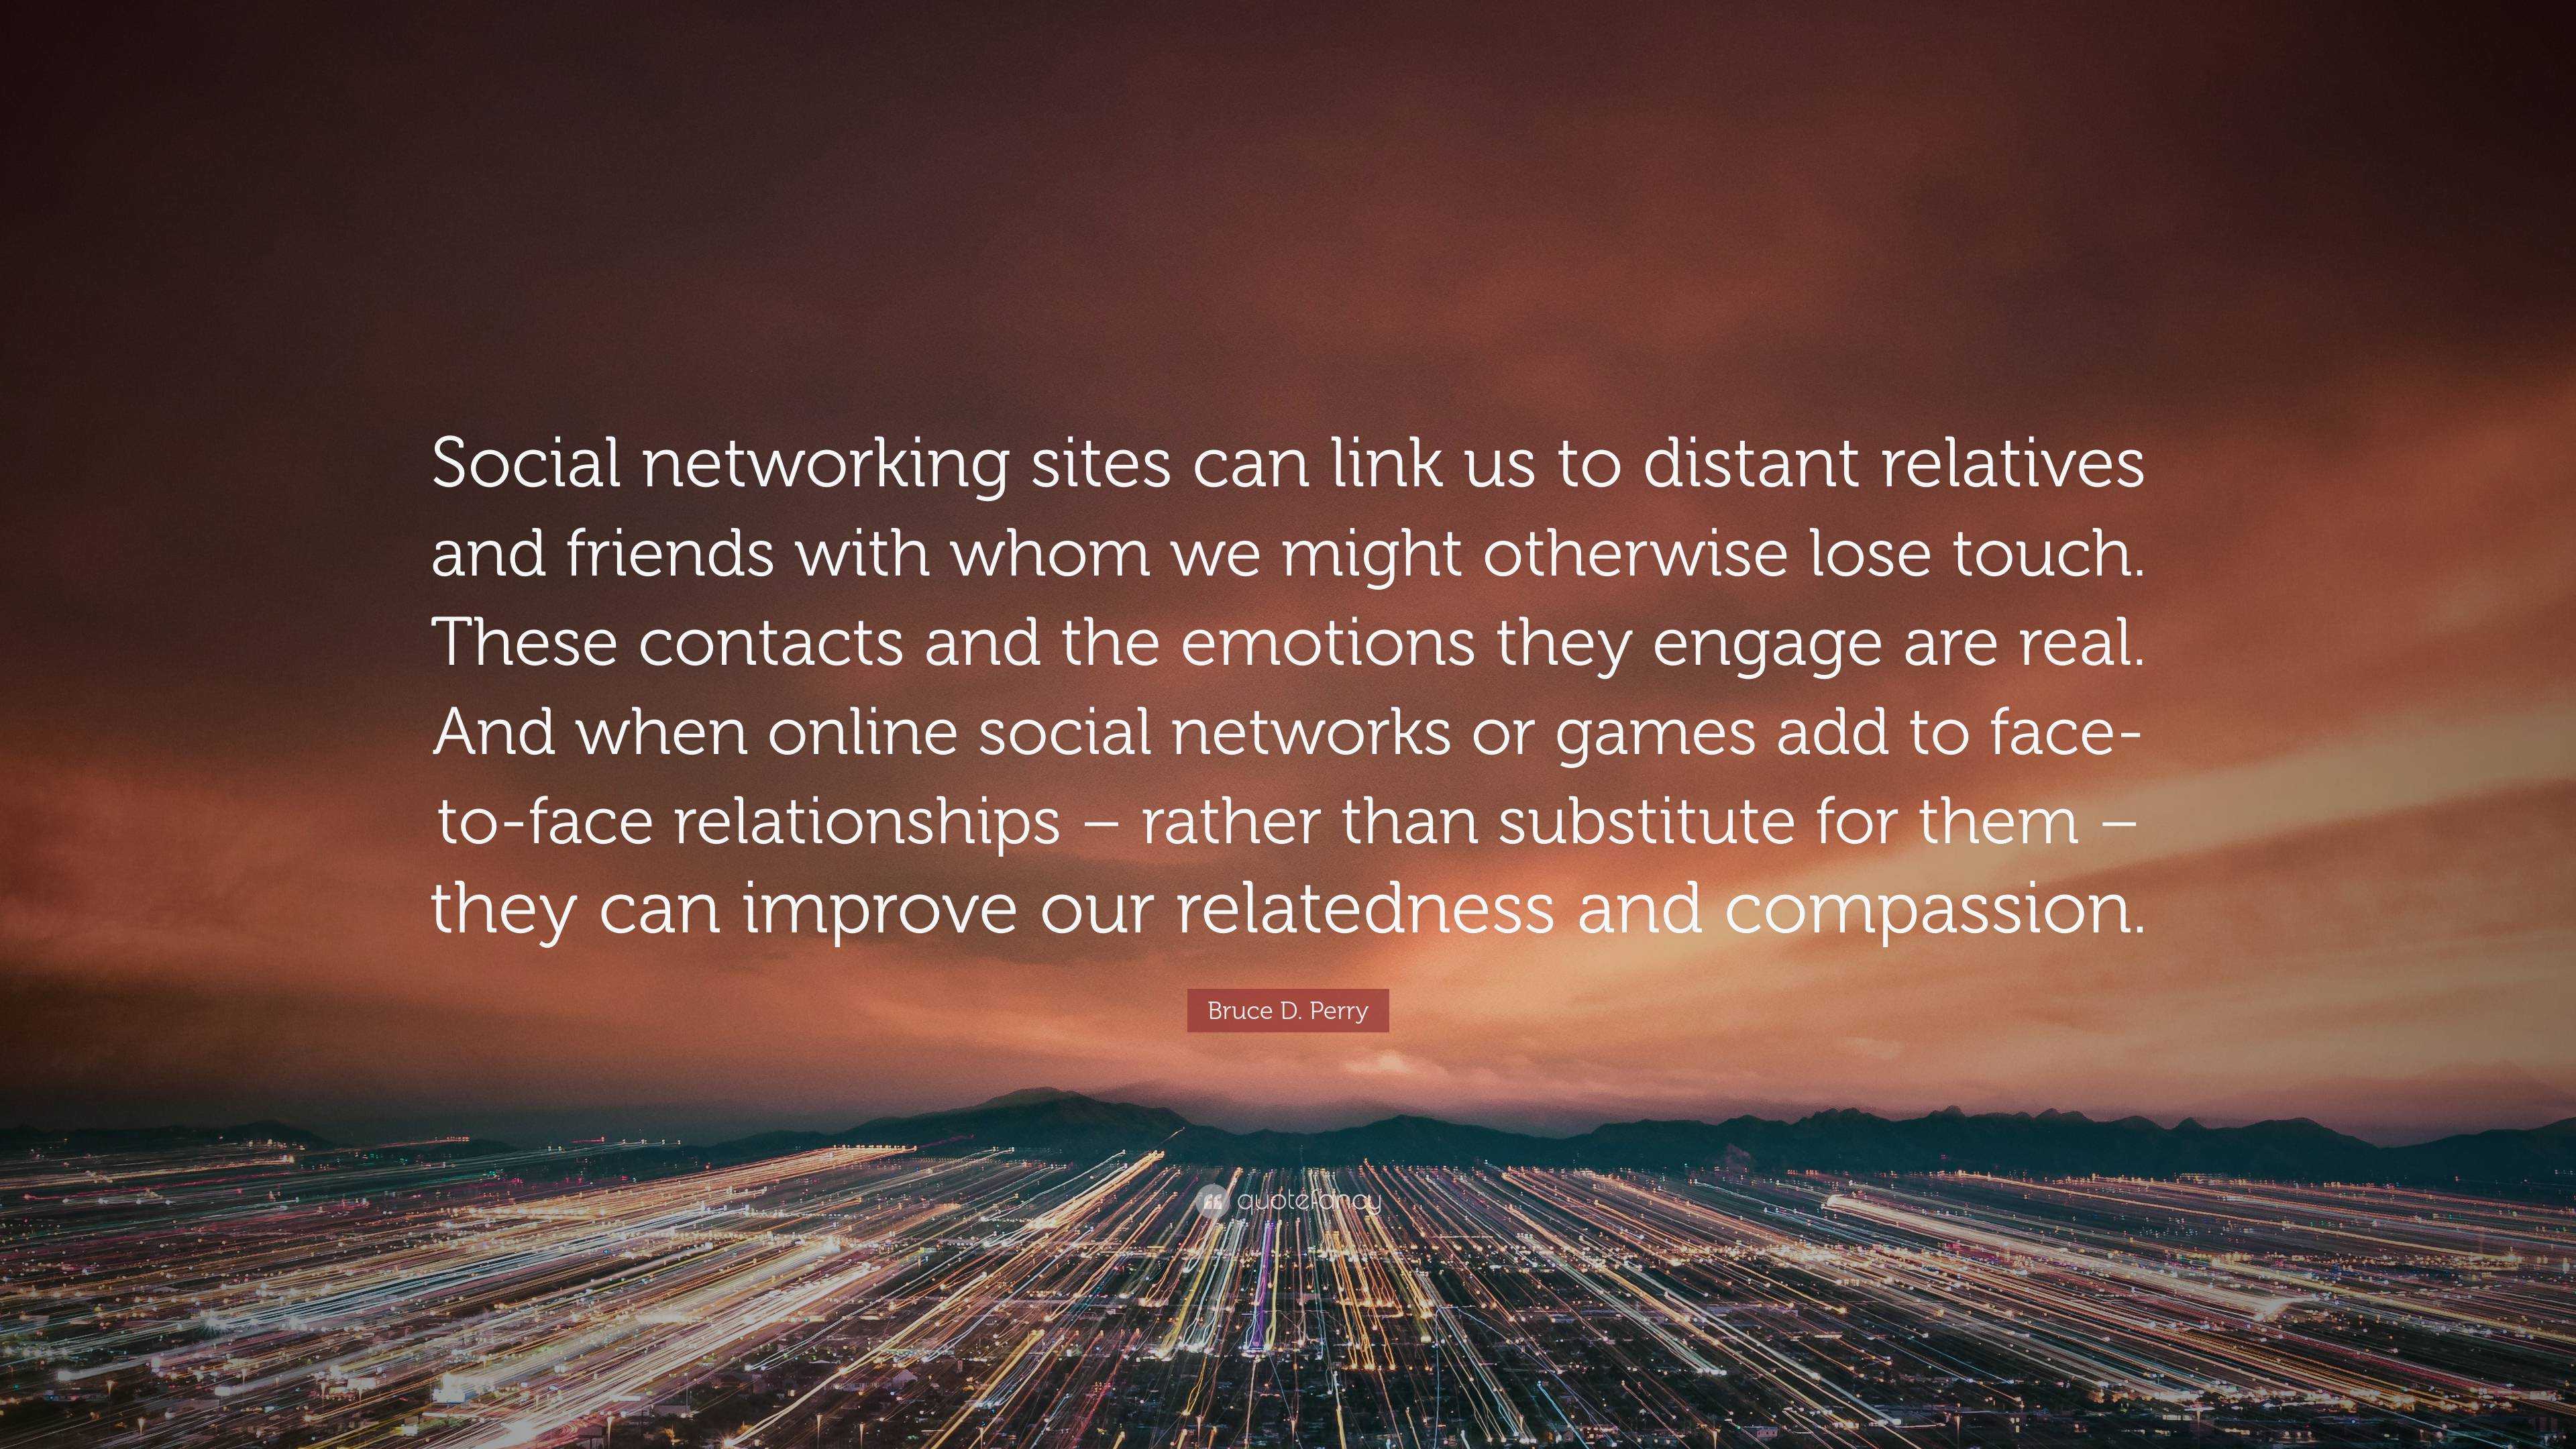 Bruce D. Perry Quote: “Social networking sites can link us to distant  relatives and friends with whom we might otherwise lose touch. These  cont”